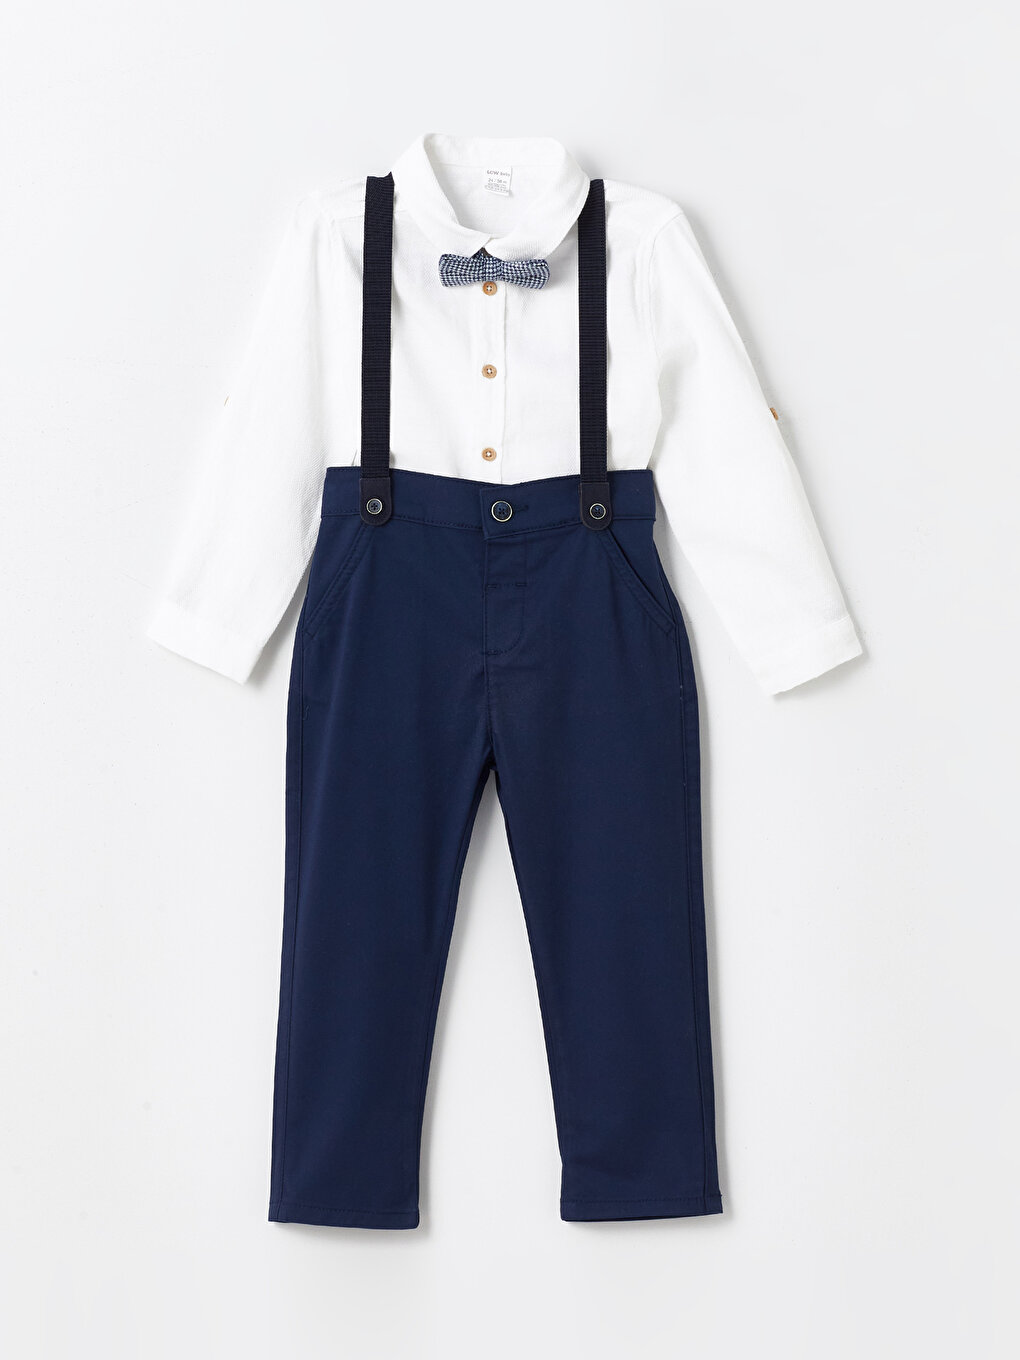 Suspenders for trousers